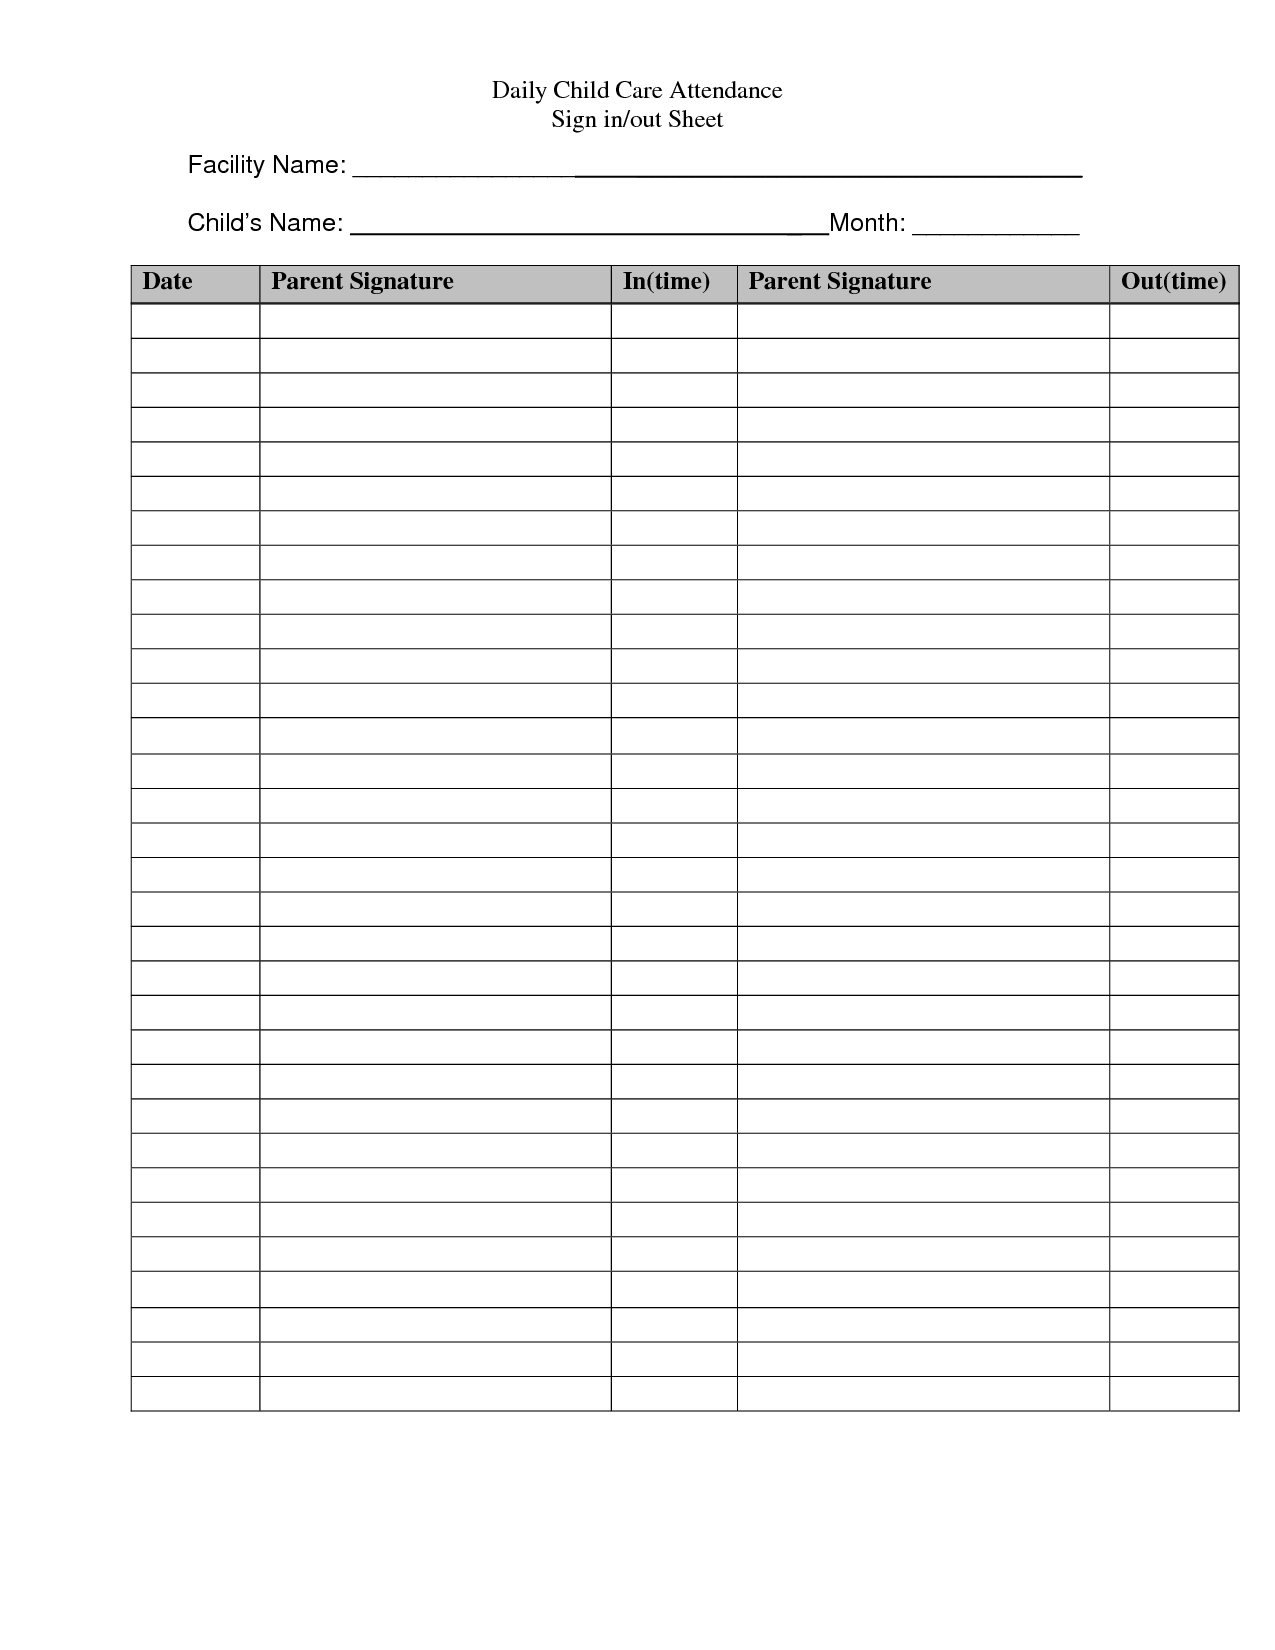 Templates That Are Free For Daycare Signs | Daily Child Care for Day Care Attendance Sheet Template